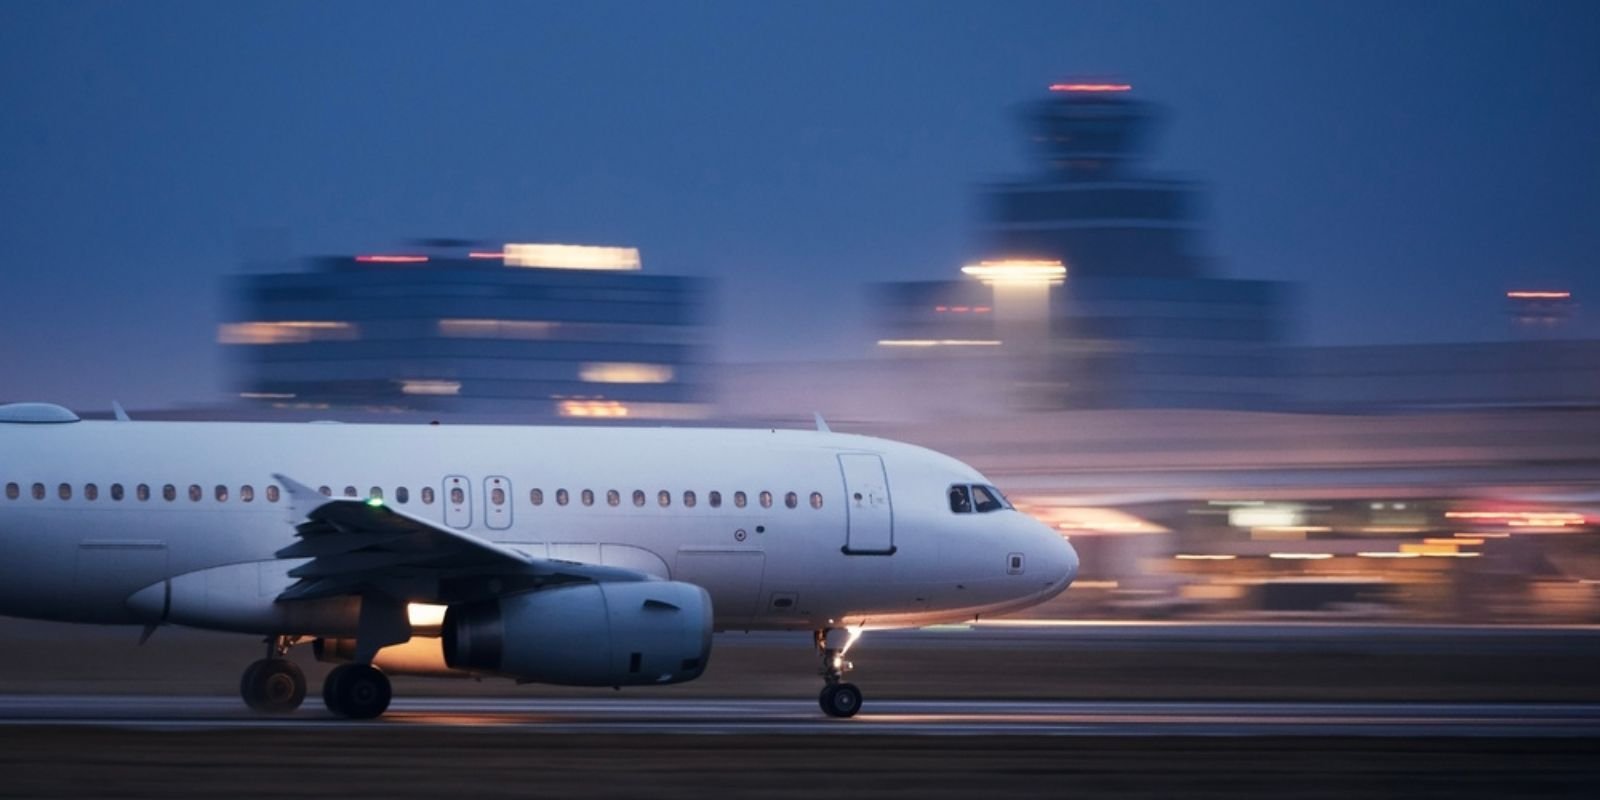 blurred image of airline at take off